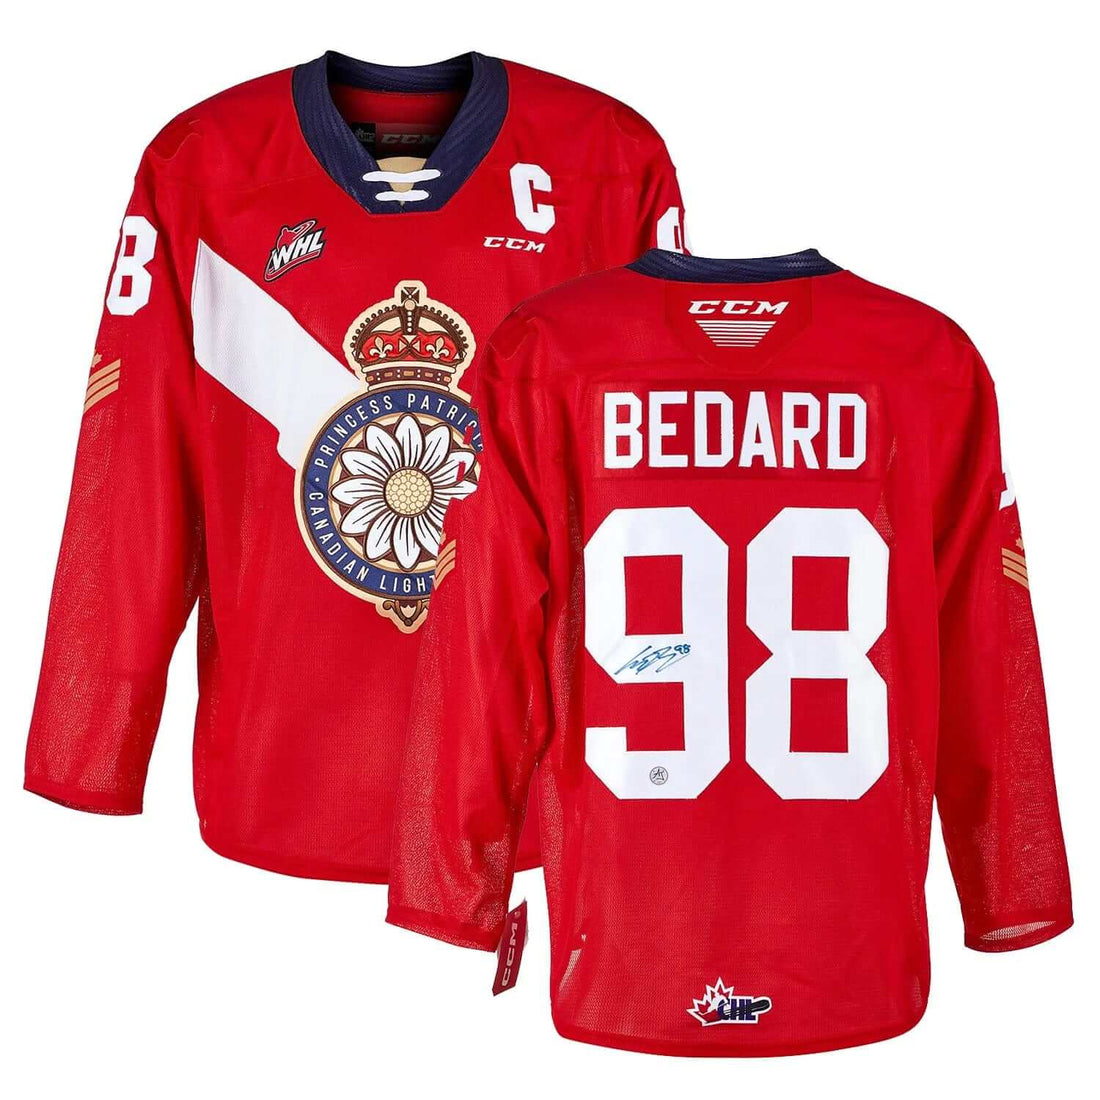 Connor Bedard Autographed Regina Pats 3rd Jersey Red. Front and Back, number 98. Accompanied by Certificate of Authenticity.